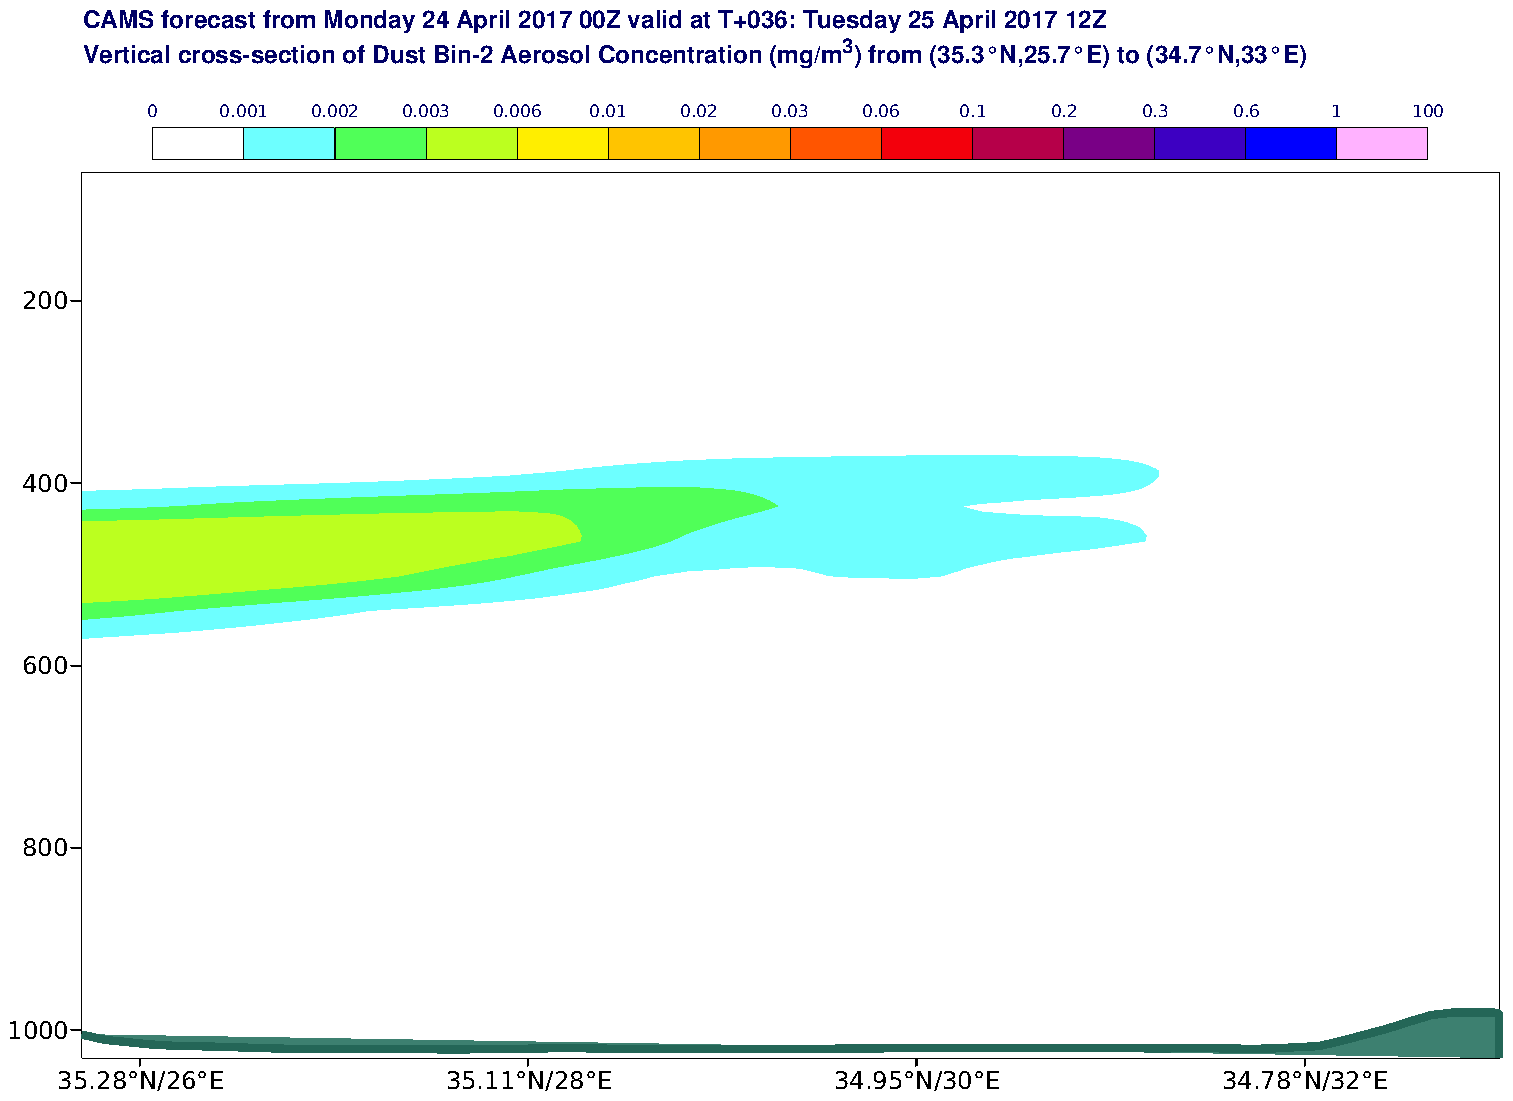 Vertical cross-section of Dust Bin-2 Aerosol Concentration (mg/m3) valid at T36 - 2017-04-25 12:00